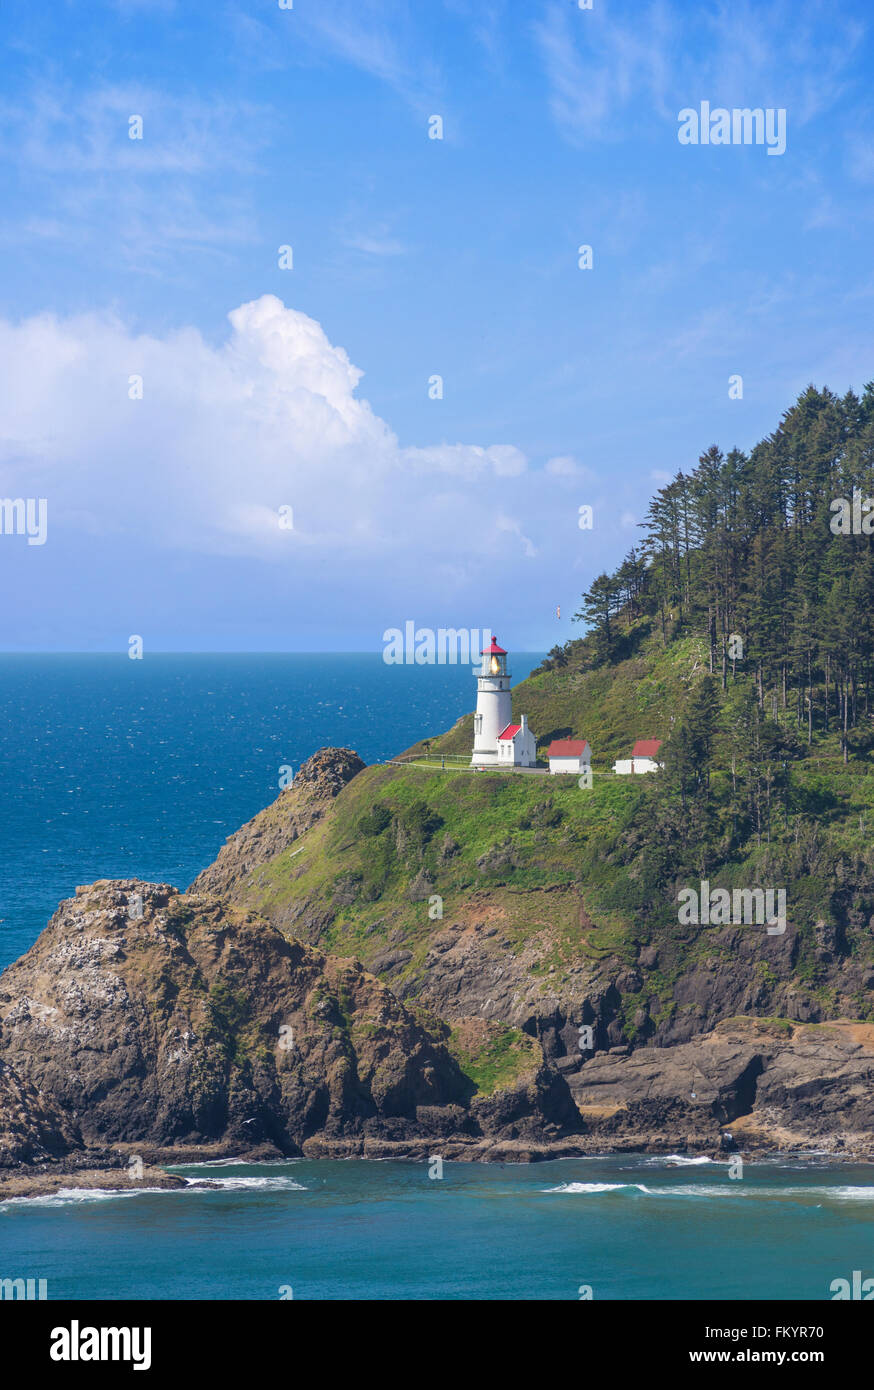 Distant clouds punctuate a bright blue sky at the Heceta Head lighthouse on Oregon's central coast. A popular landmark for touri Stock Photo